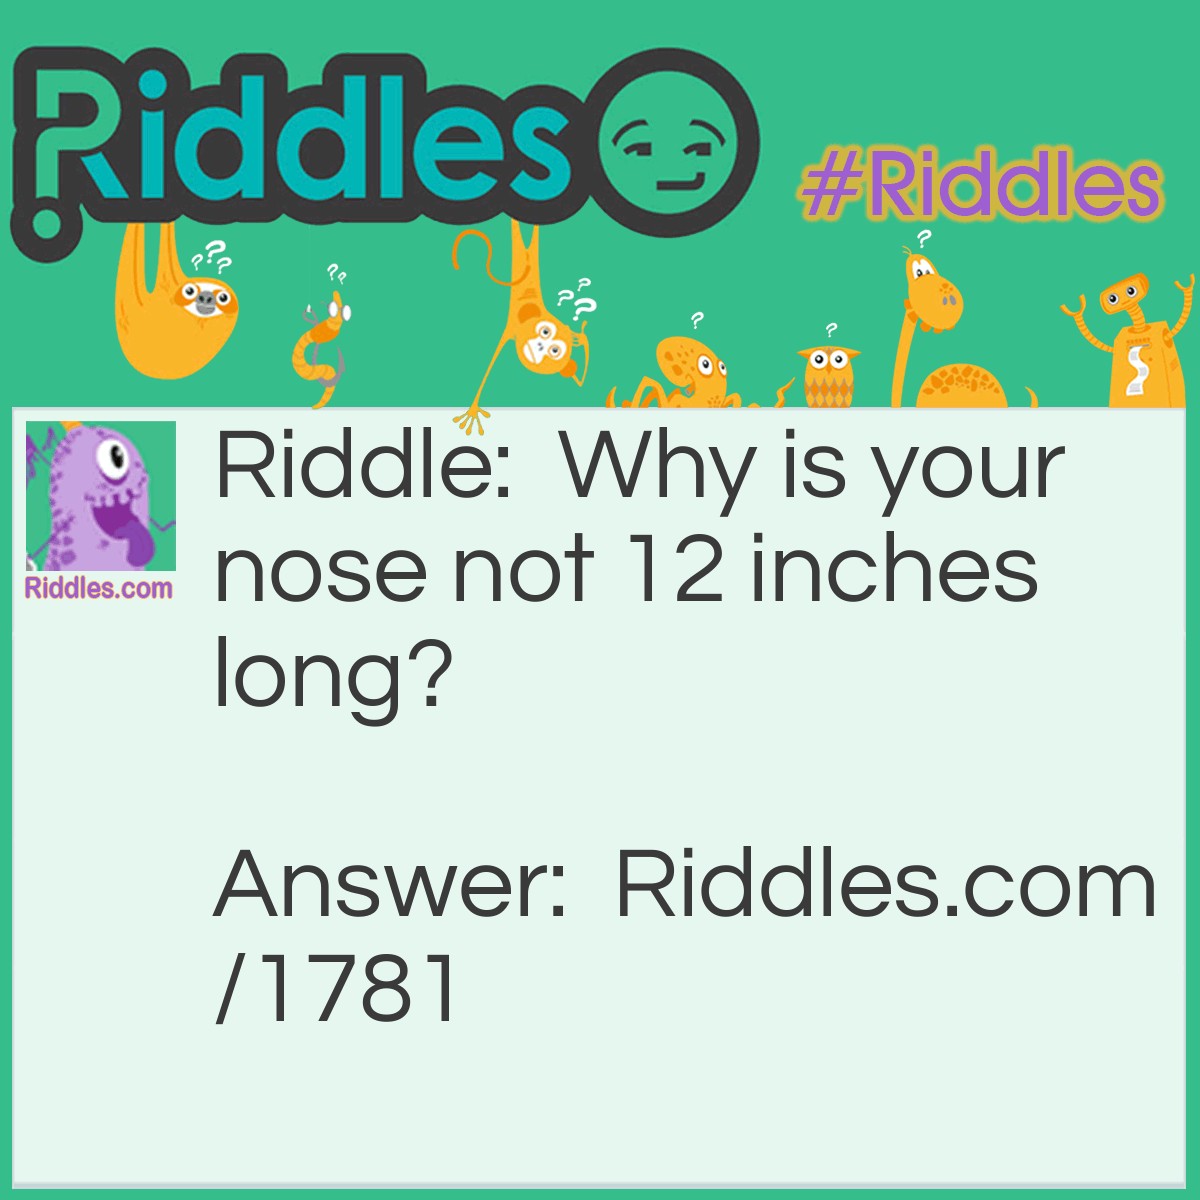 Riddle: Why is your nose not 12 inches long? Answer: Because it would then be a foot.